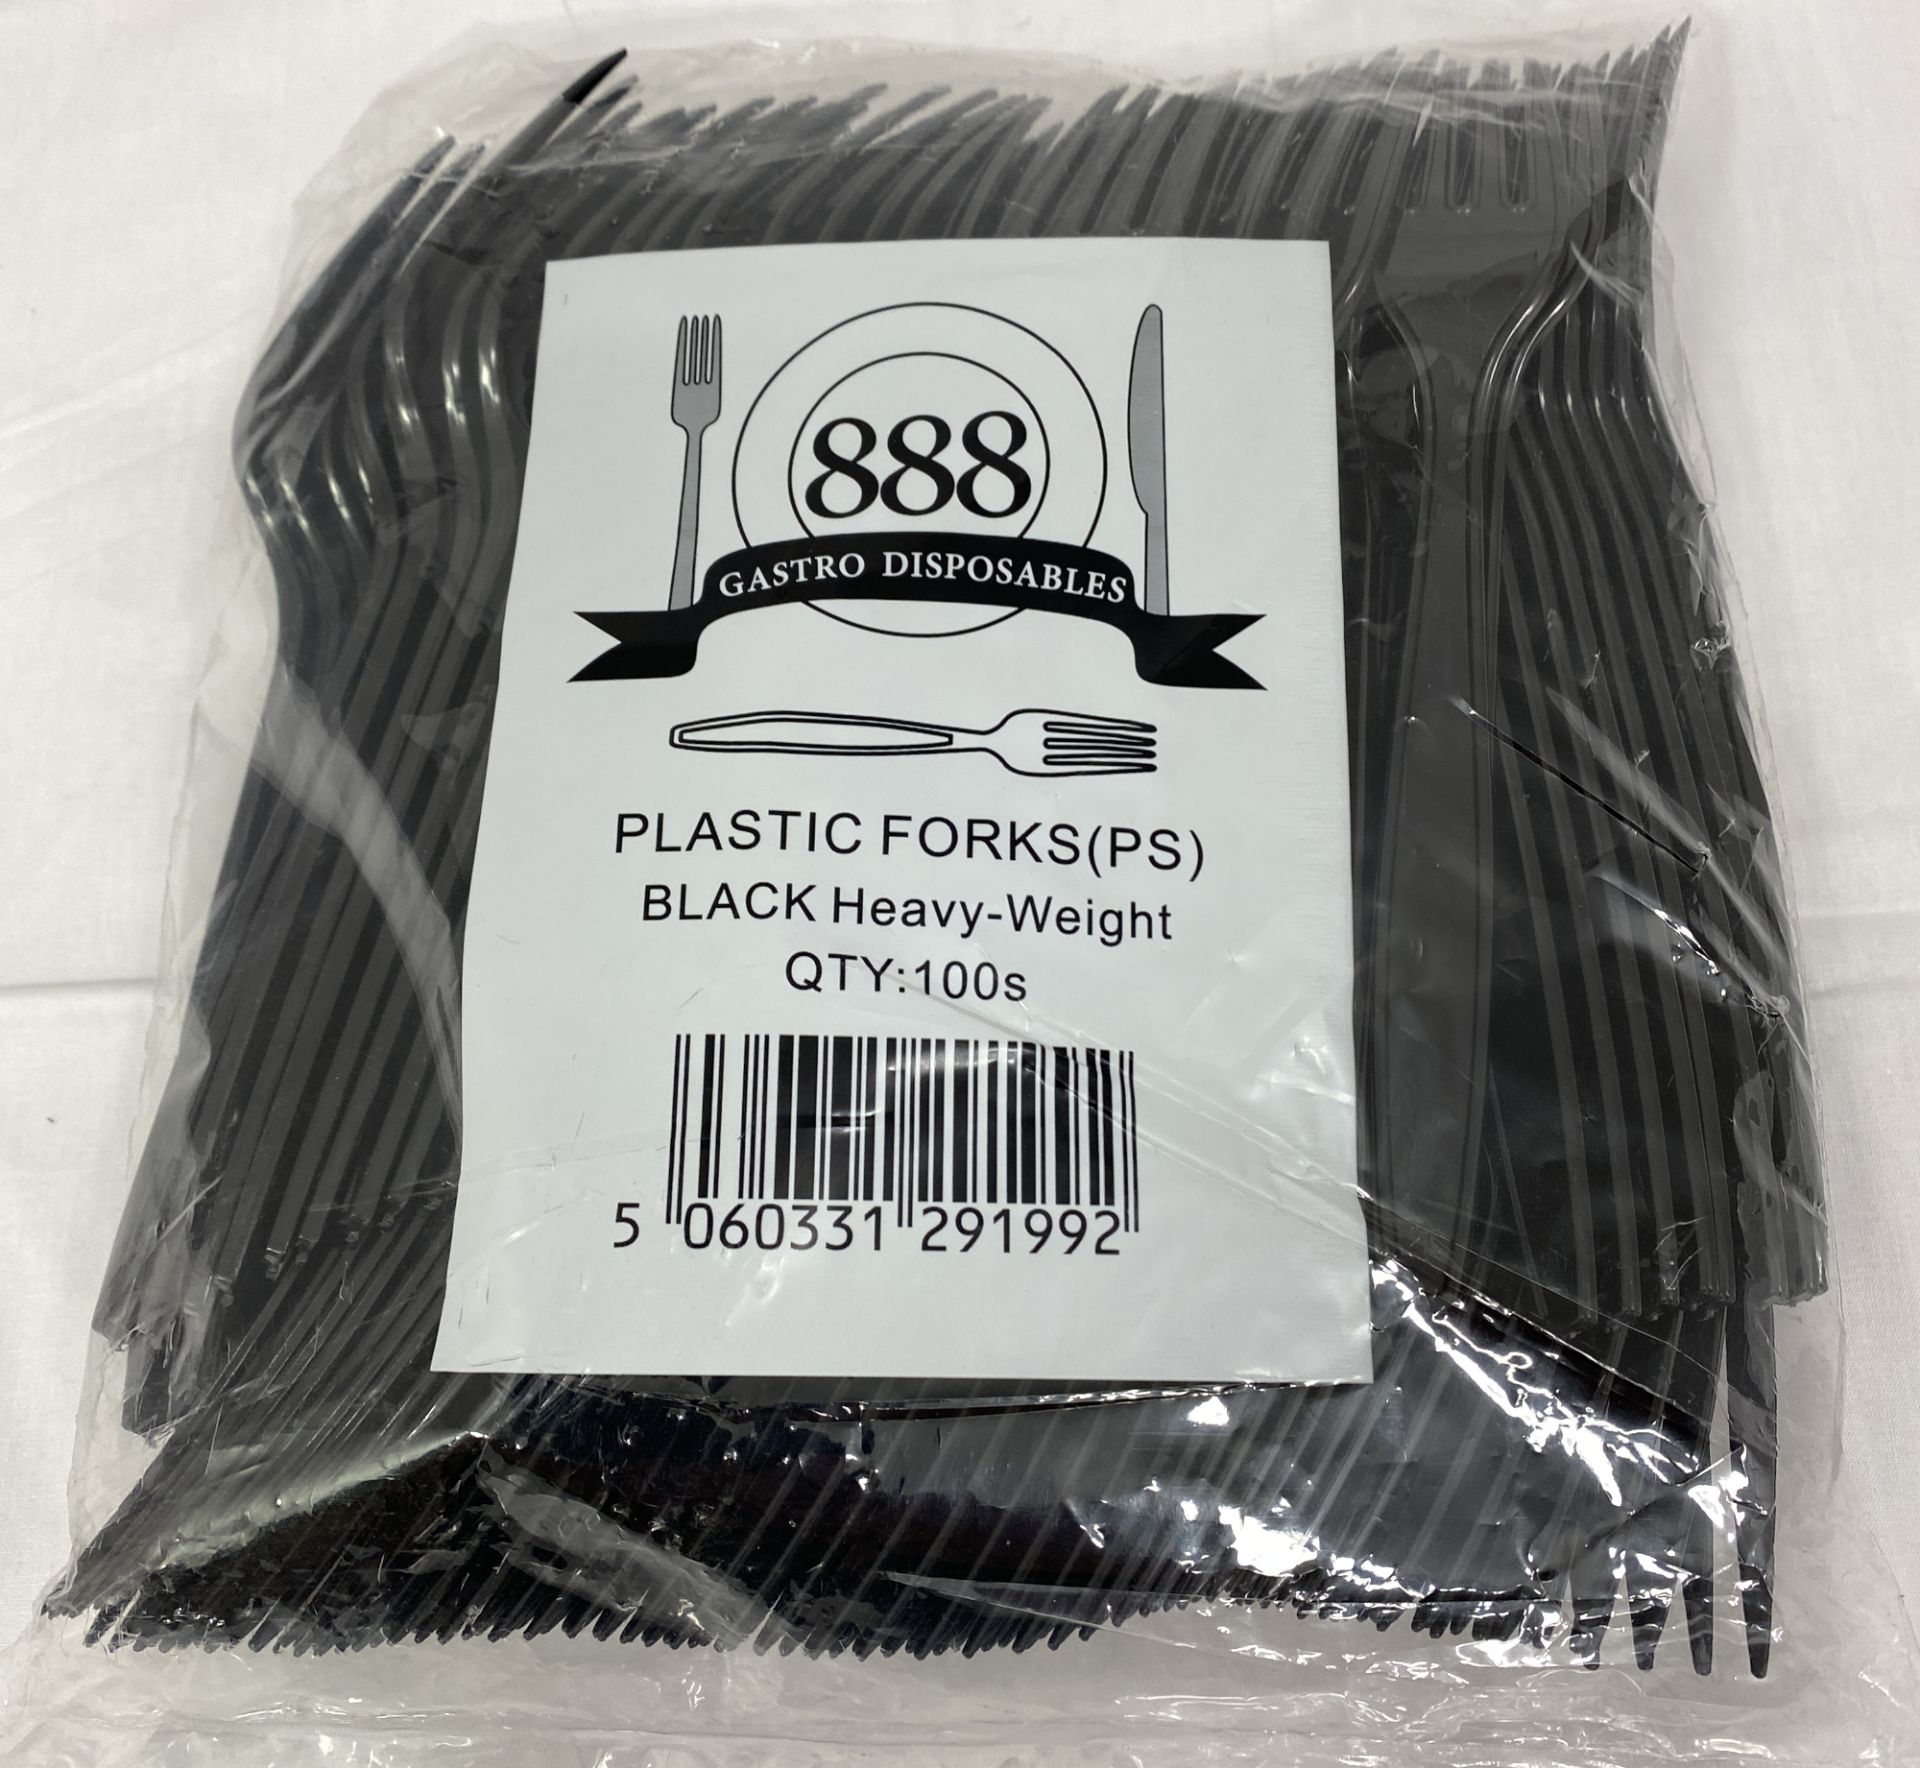 2 x Boxes of 1000 Plastic Forks by 888 Gastro Disposables | DSP7 - Image 2 of 3